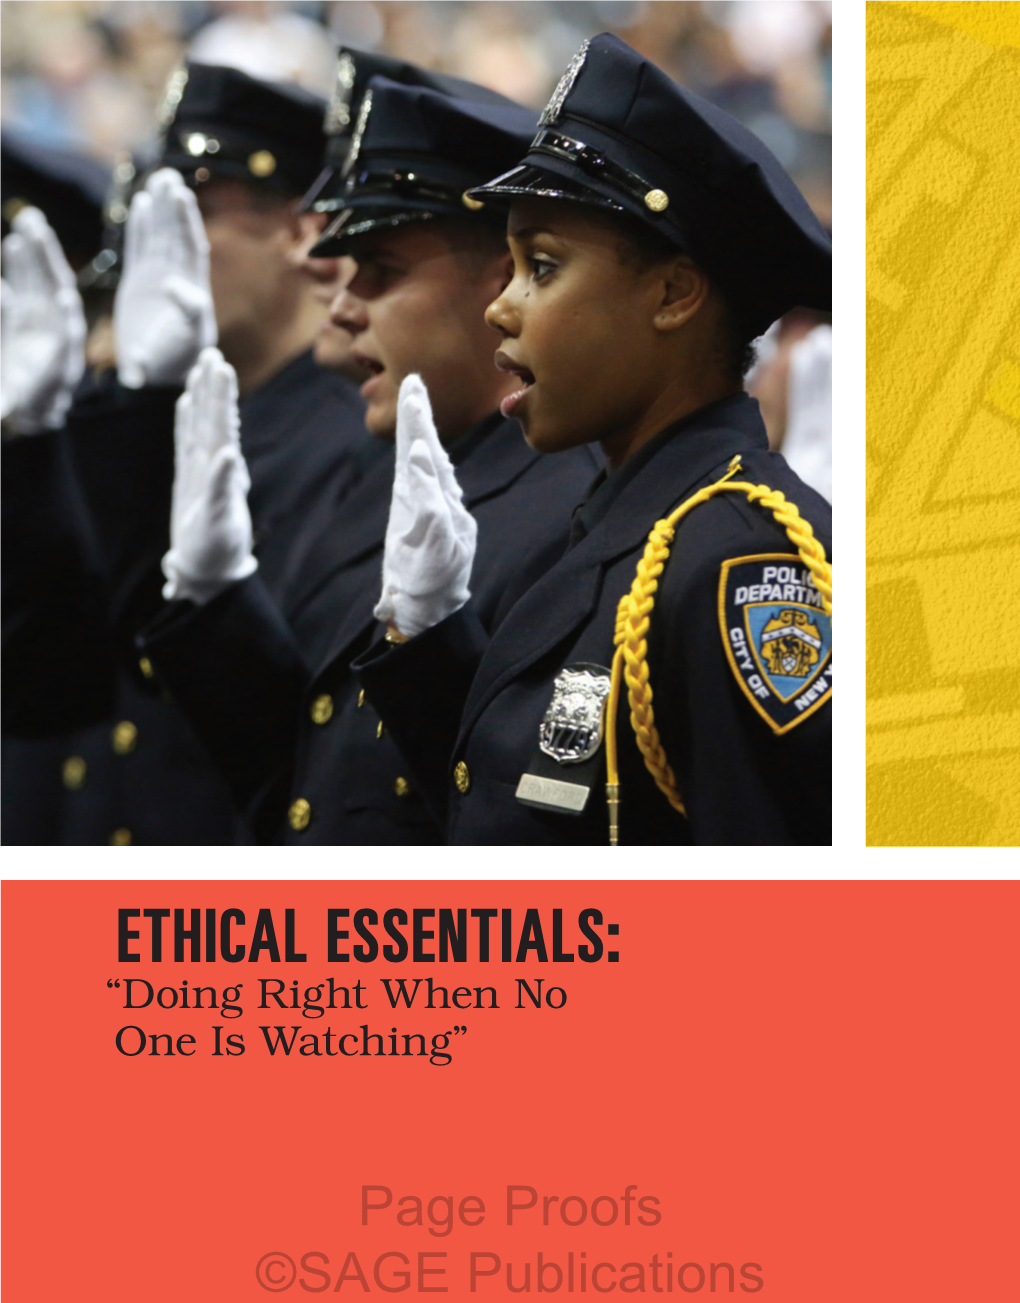 ETHICAL ESSENTIALS: “Doing Right When No One Is Watching”